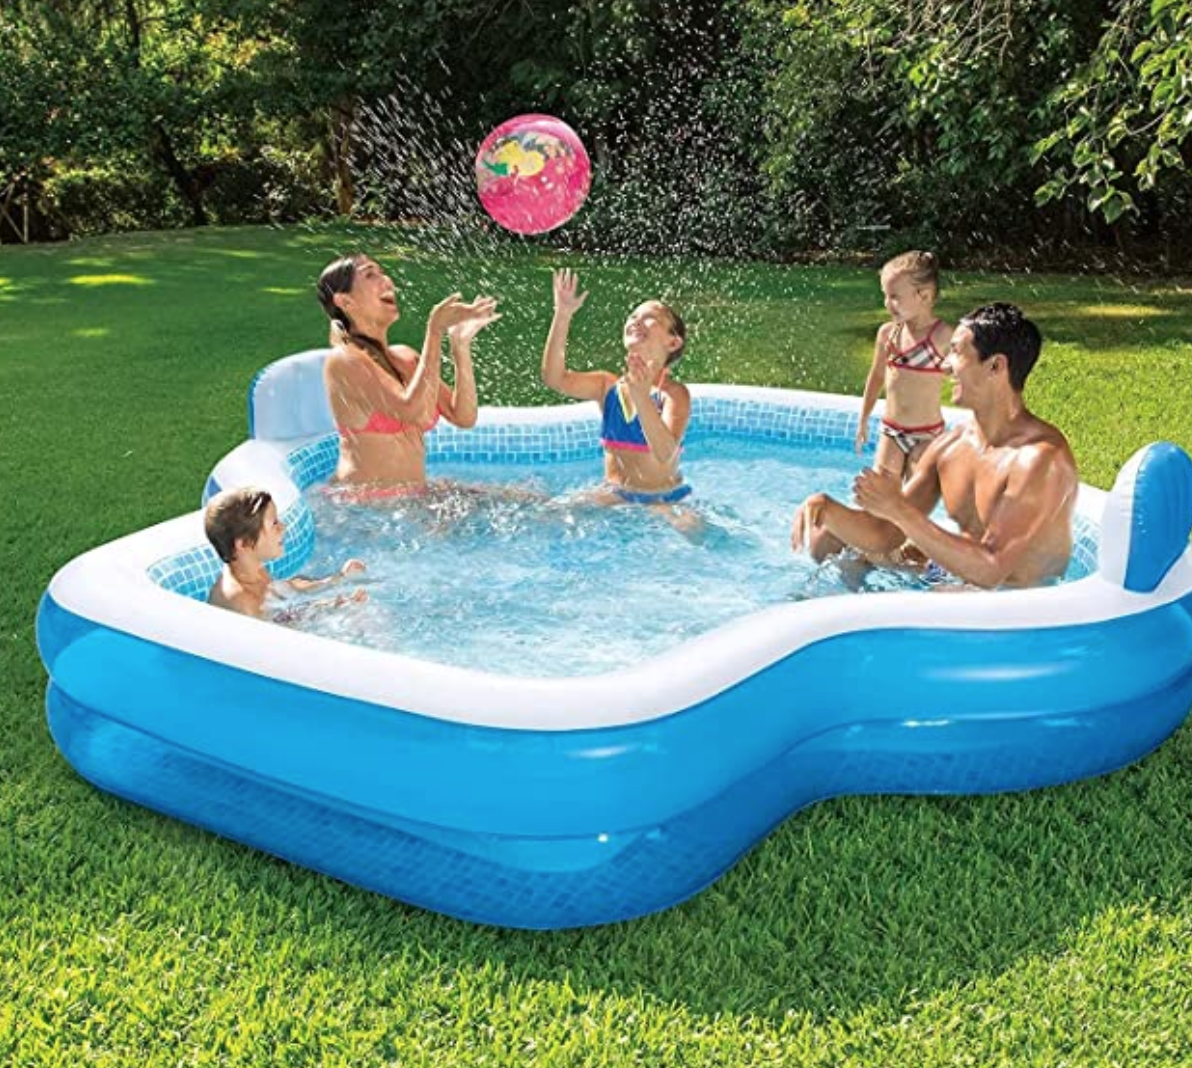 wastefully Criticism Inaccessible Where to Buy the Viral Member's Mark Inflatable Pool With Seats from TikTok